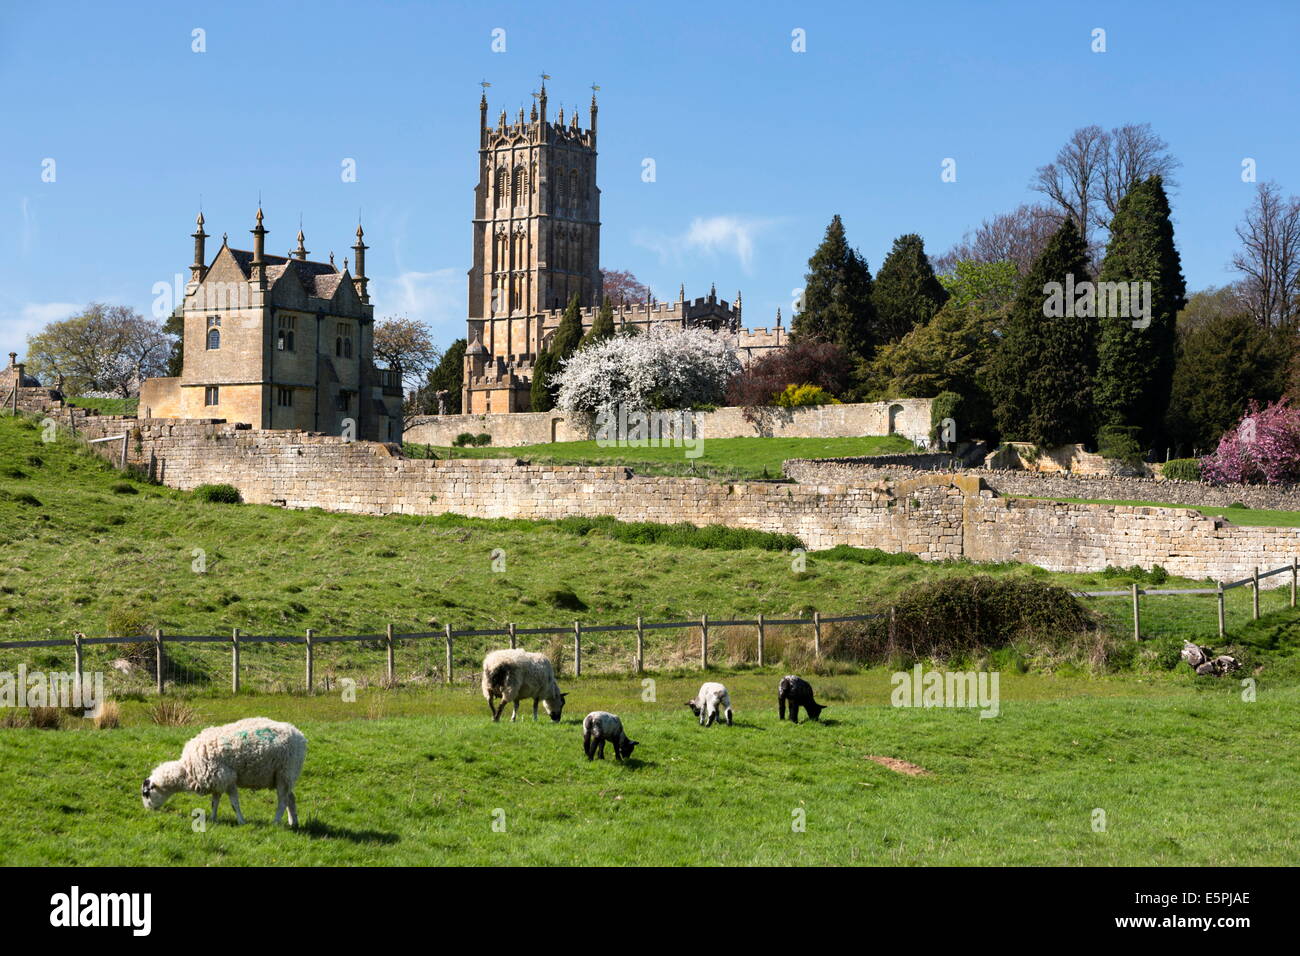 St James Church, Chipping Campden, Cotswolds, Gloucestershire, Angleterre, Royaume-Uni, Europe Banque D'Images